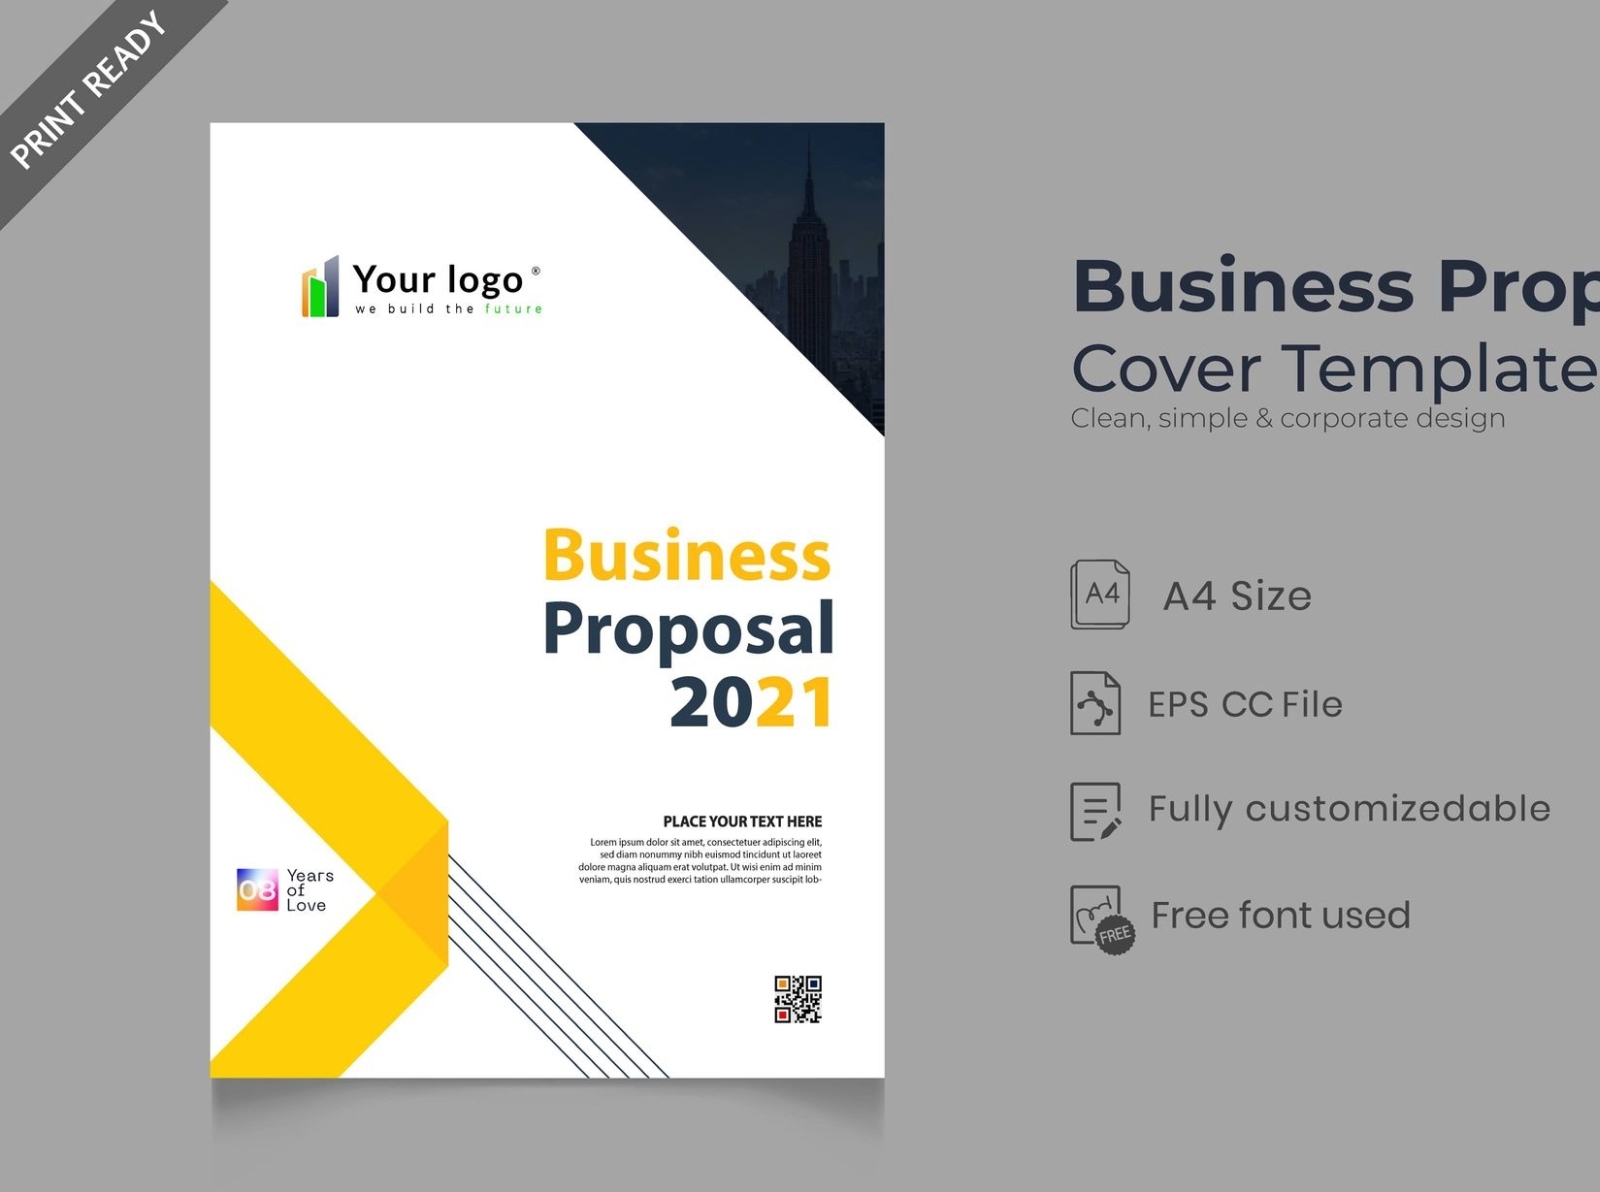 download a business proposal drakorcute